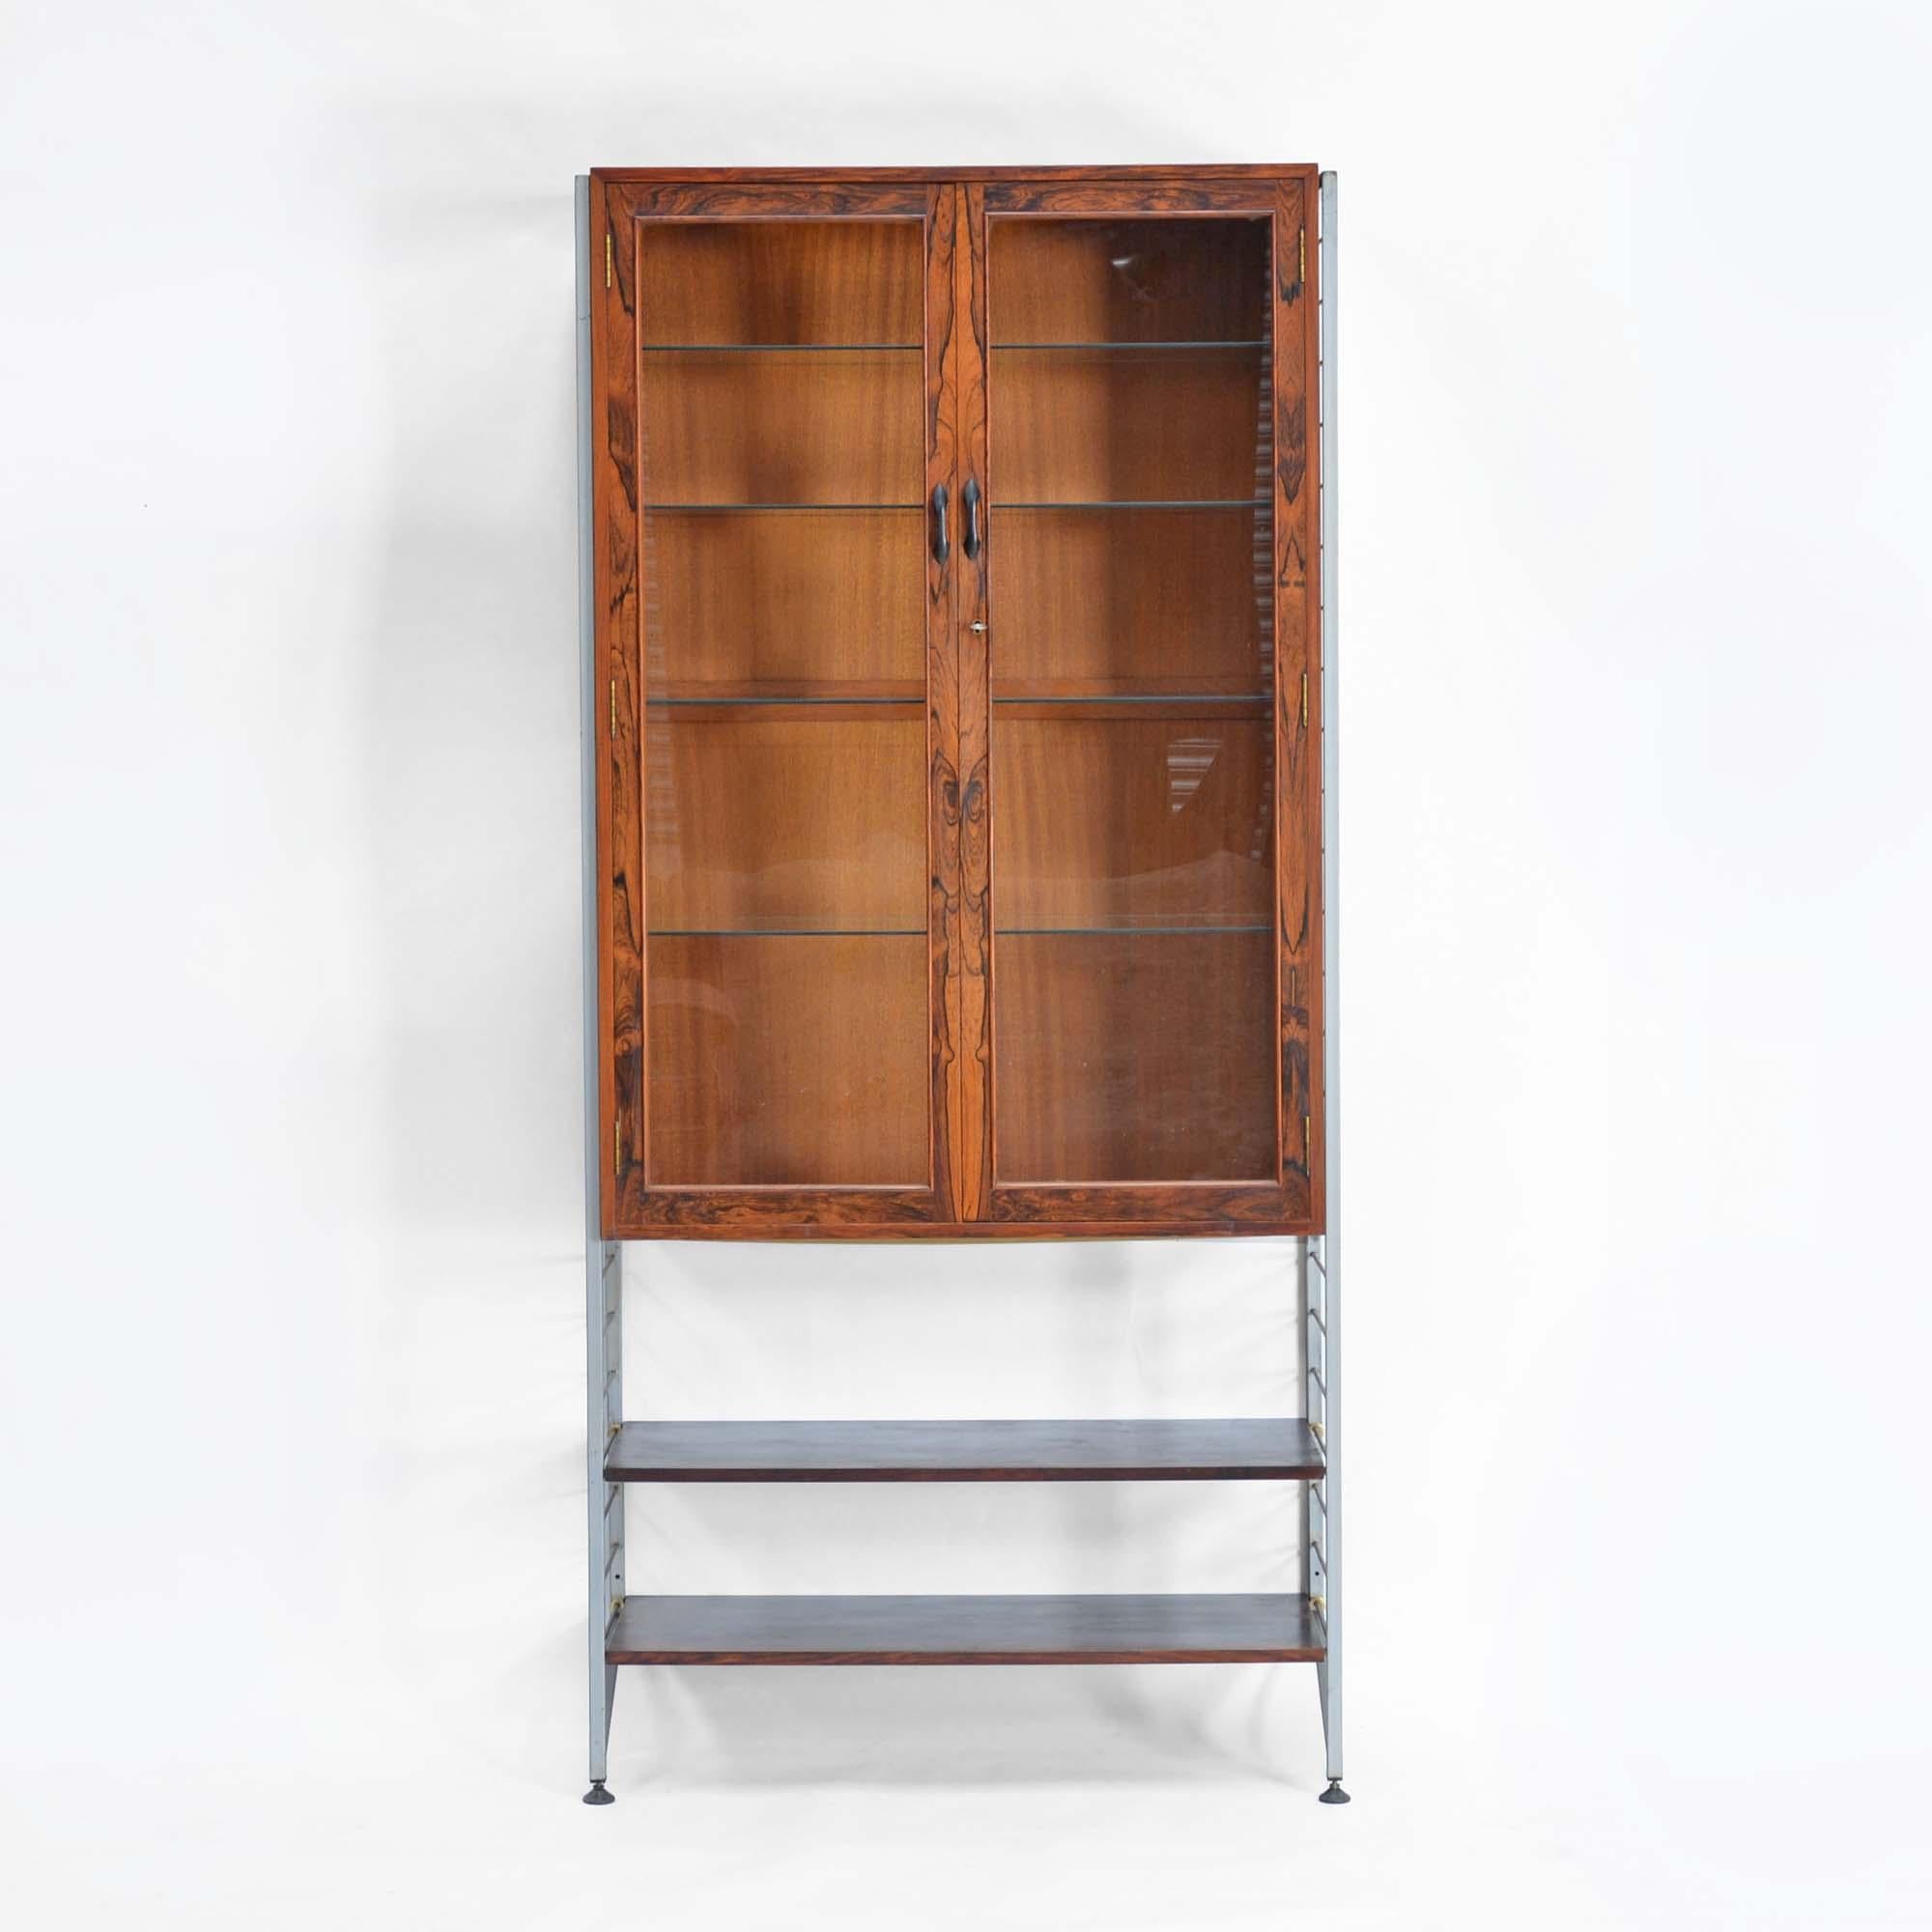 Heals rosewood Ladderax cabinet
The modular Ladderax system where all components are hung from the two ladders, in this case one cabinet and 2 shelves can be hung in any configuration to fit your mood or room.  Created by Robert Heal in 1964 for